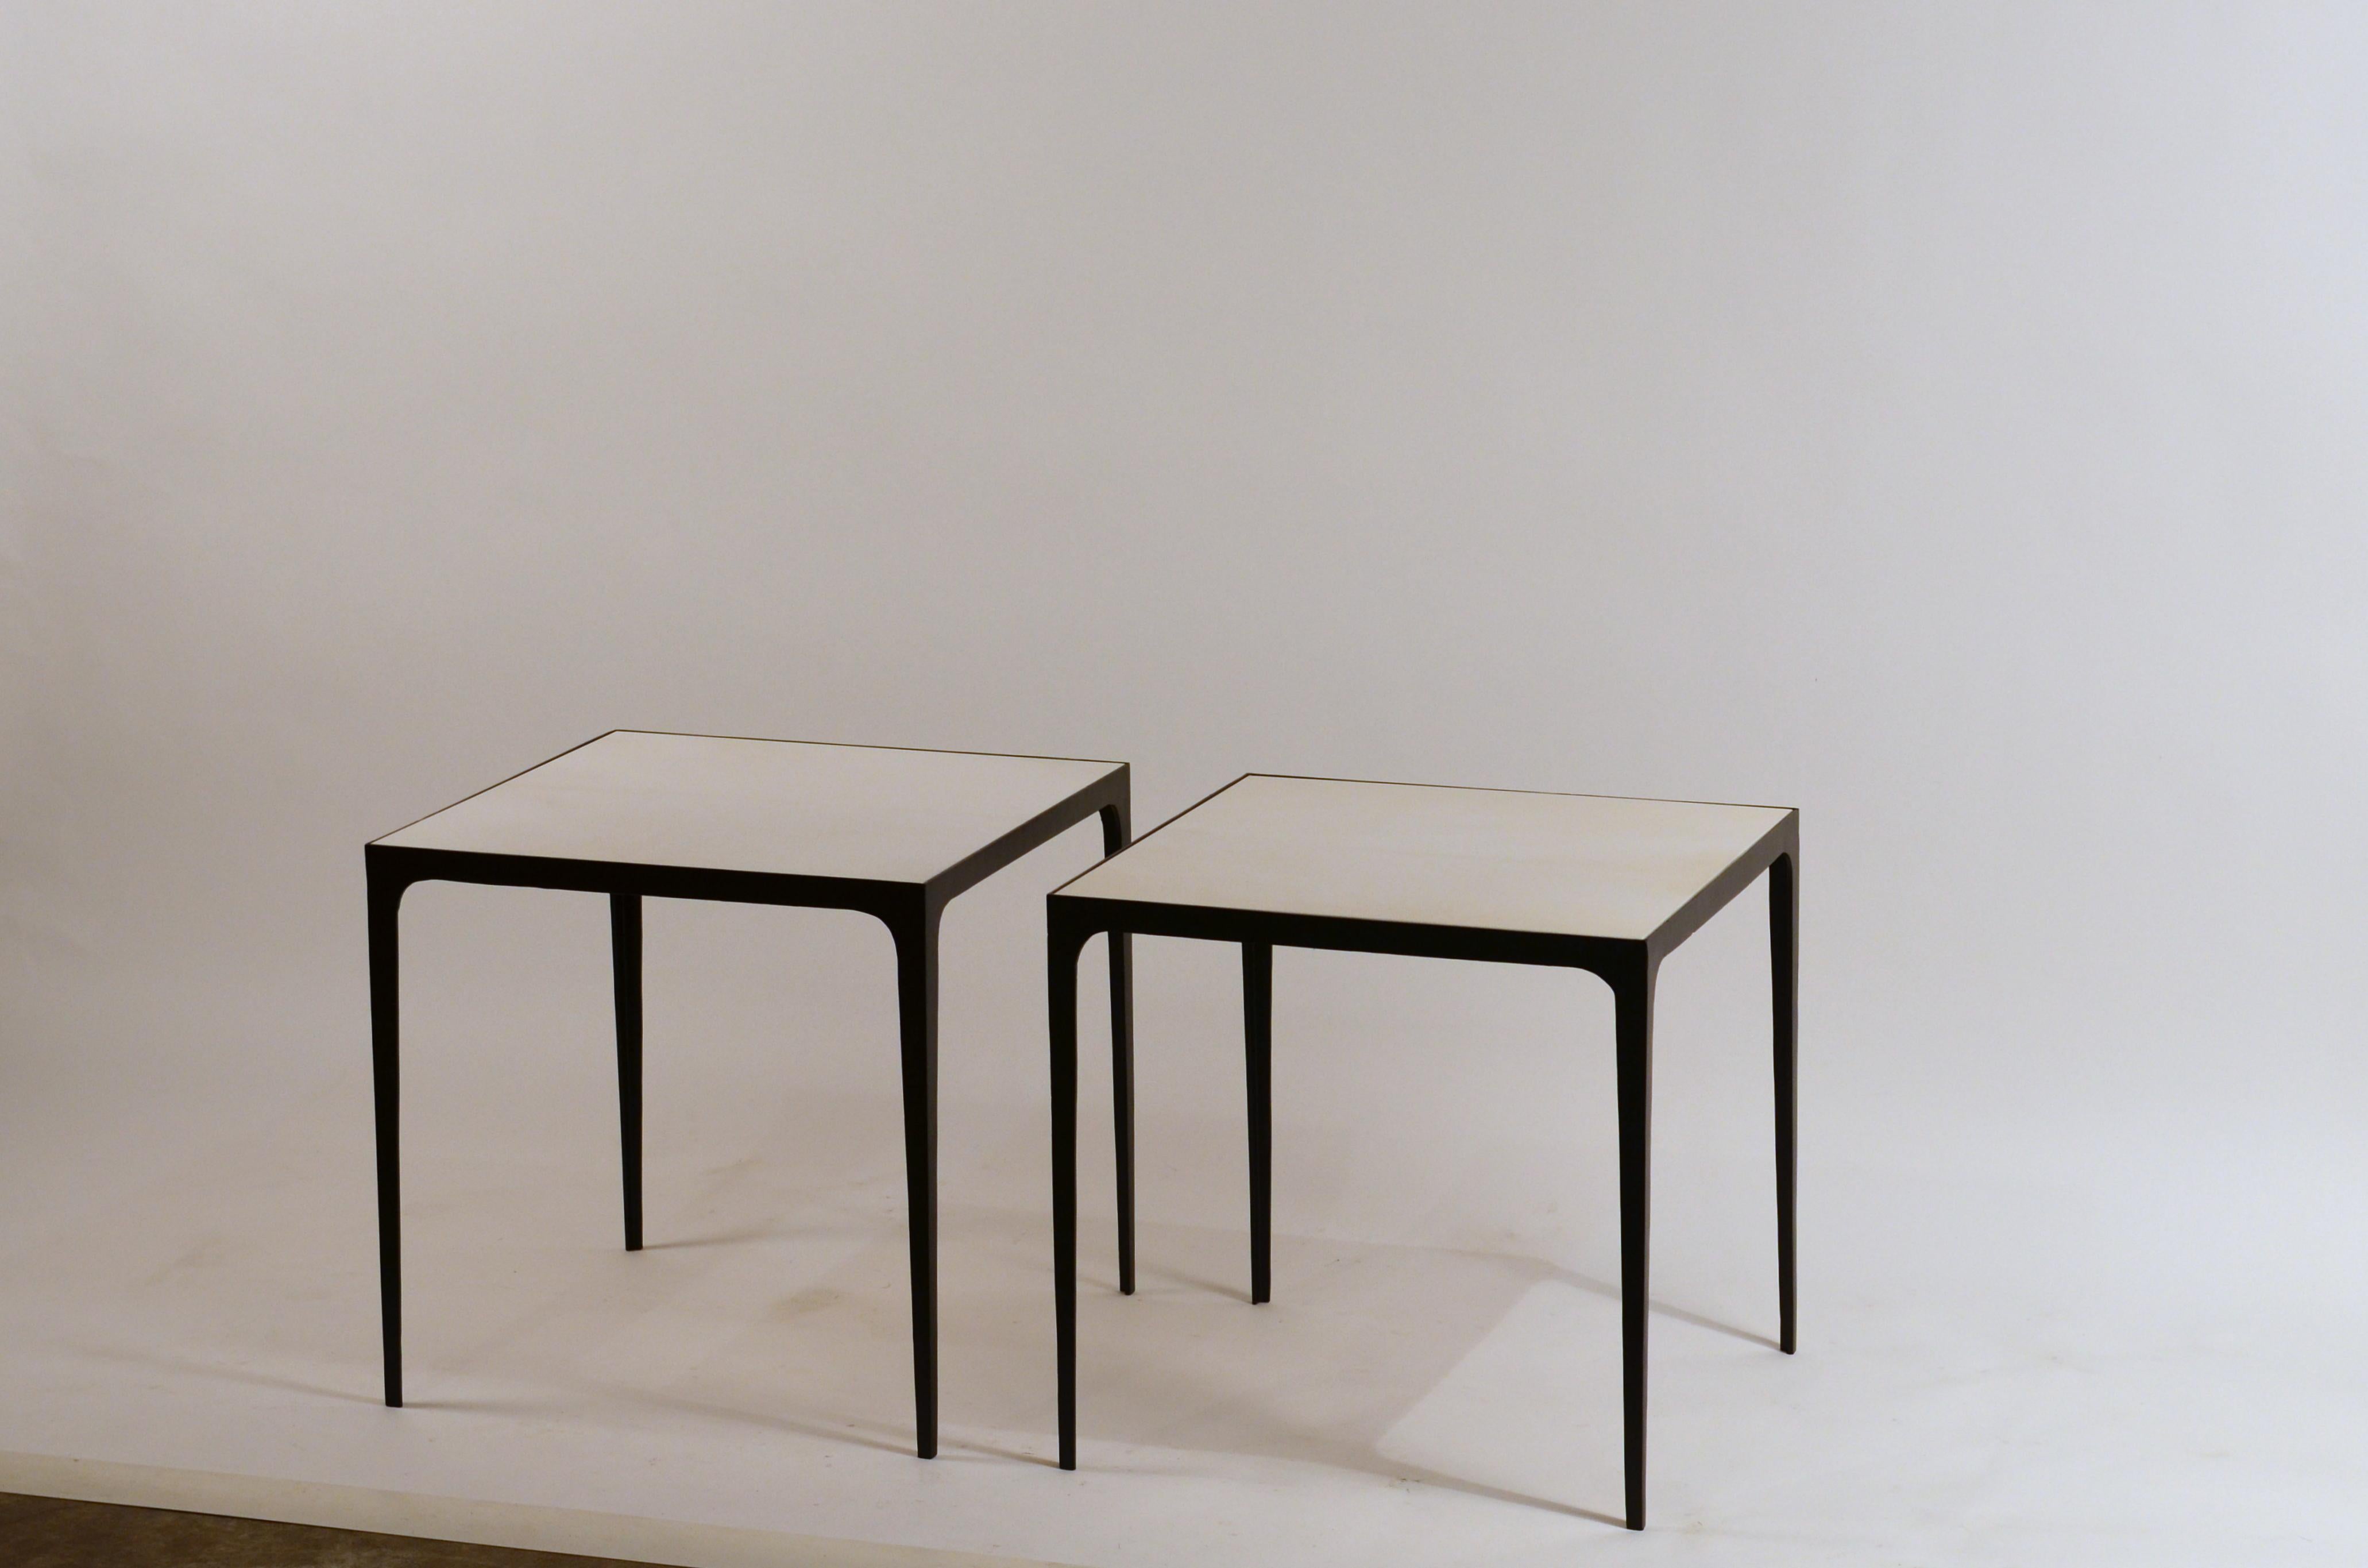 Pair of large 'Esquisse' wrought iron and parchment side tables by Design Frères. Also great as night stands.

Hand made, these elegant side tables combine chic slender blackened wrought iron bases with refined real parchment tops, adding an air